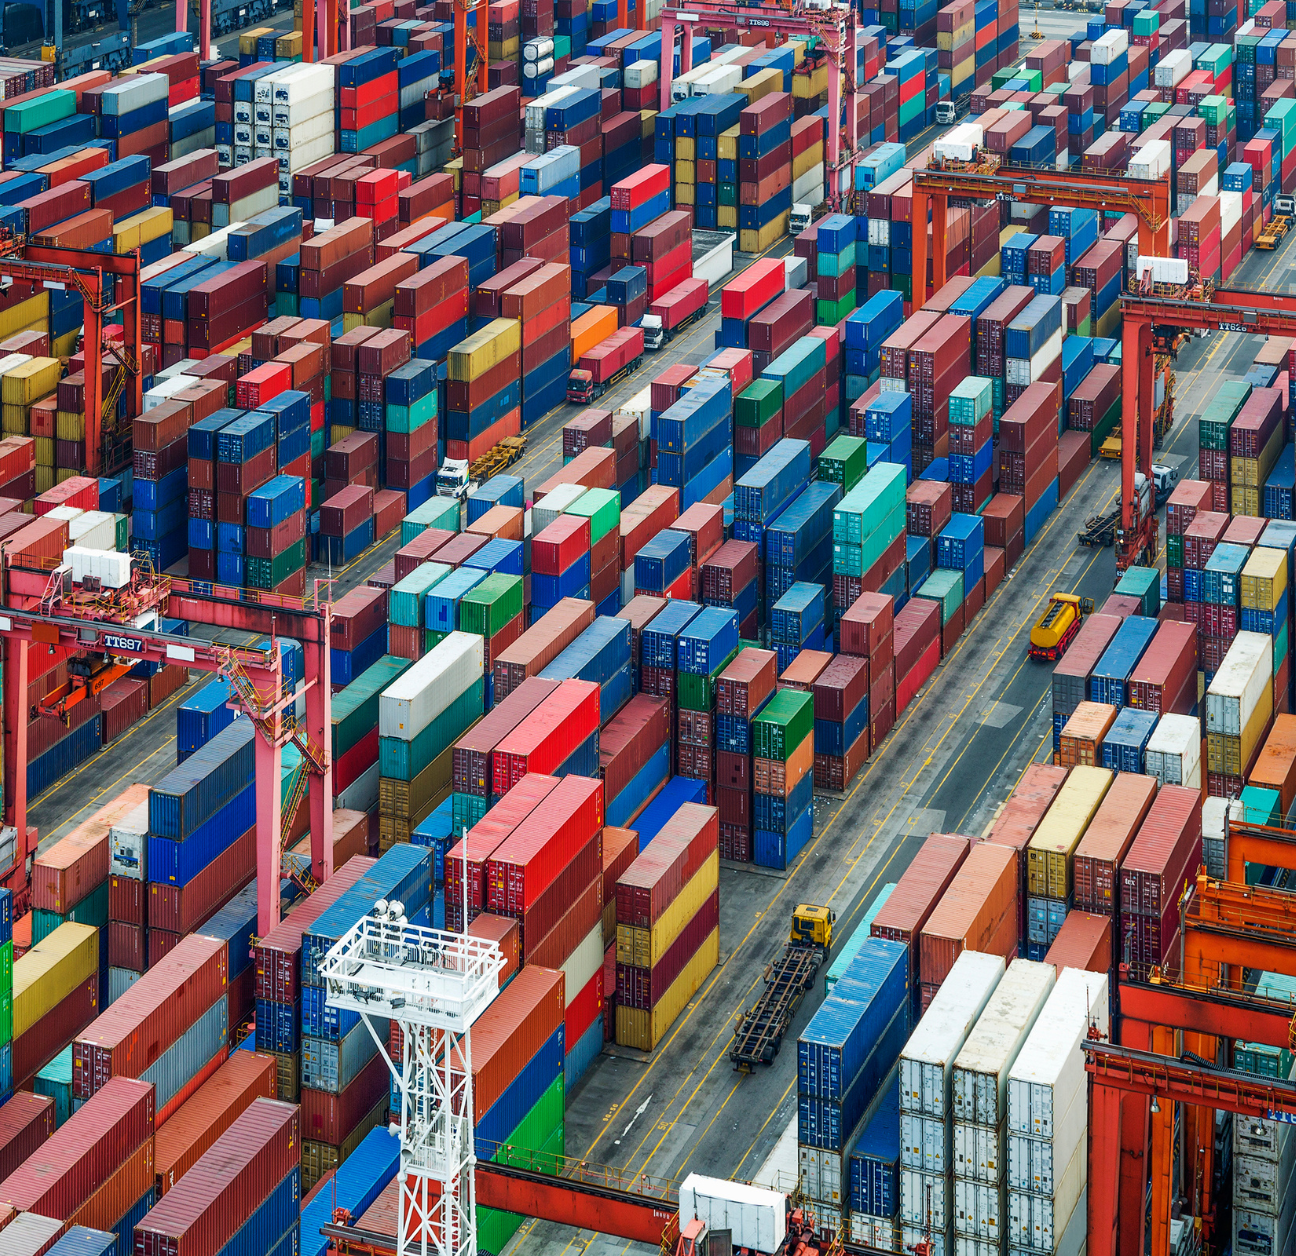 Shipping containers being tracked with supply chain visibility software